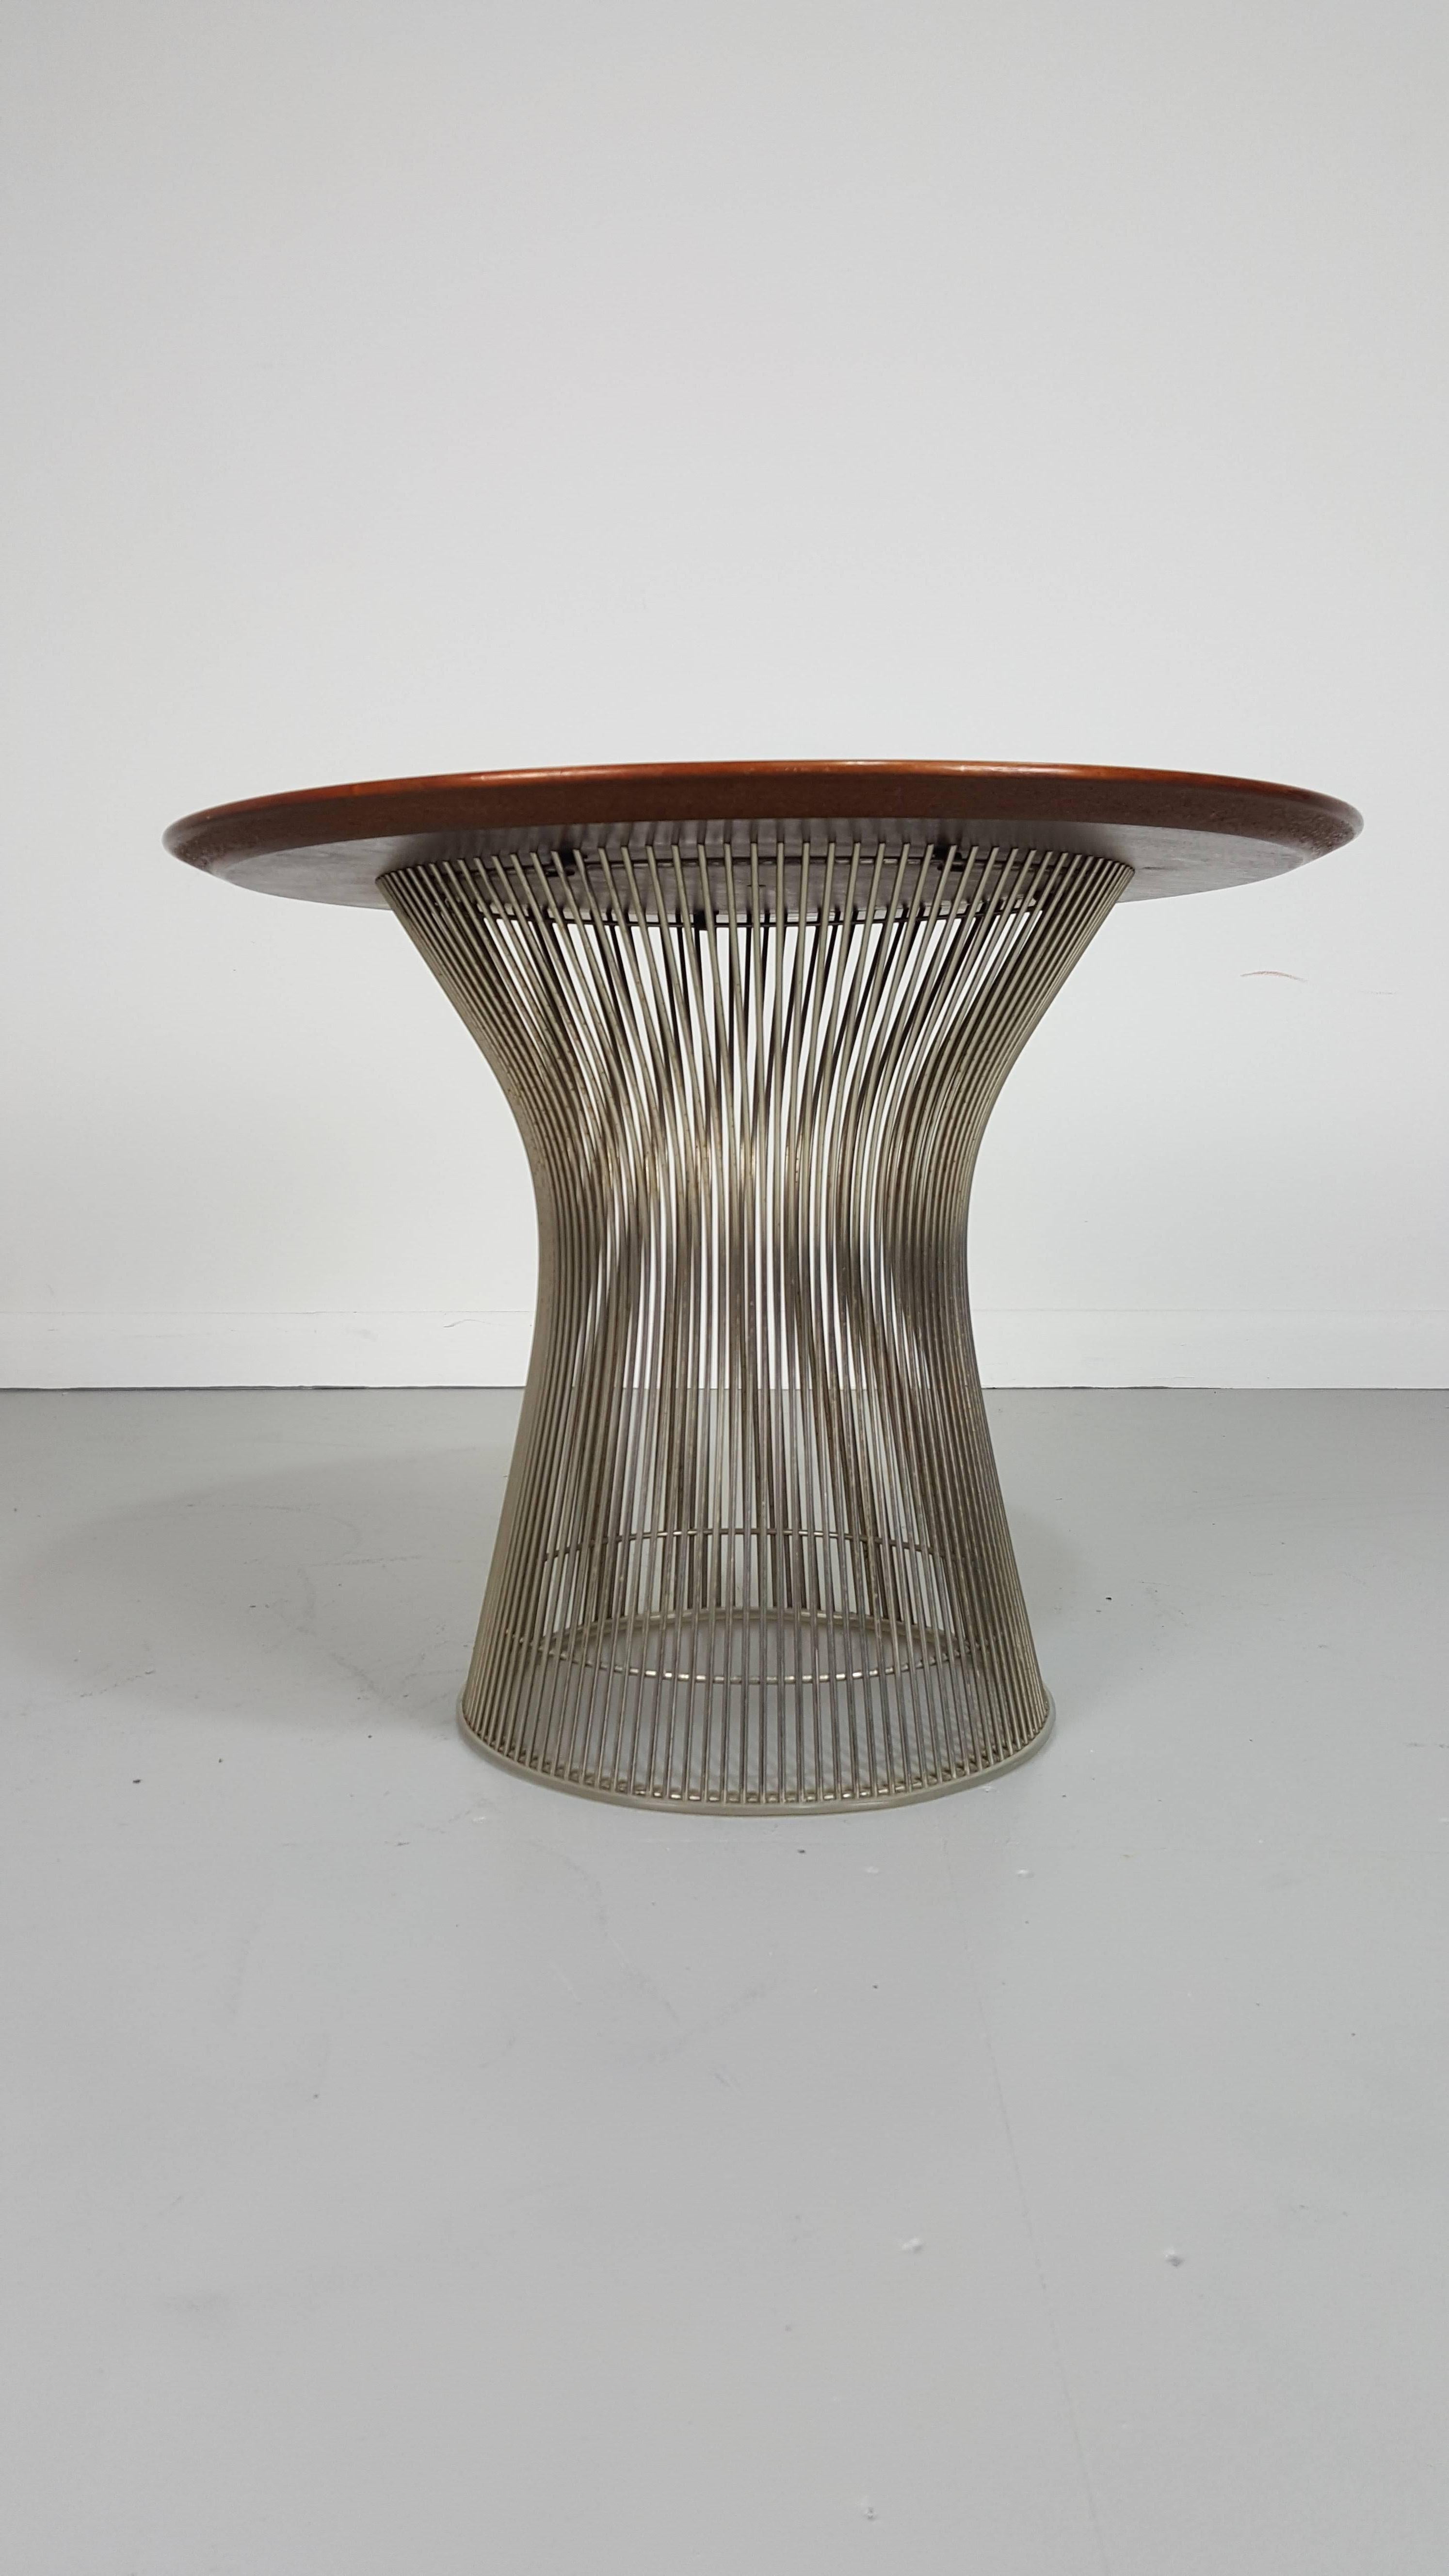 Sculptural side table by Warren Platner table for Knoll, 1970s.

See this item in our private NYC showroom! Refine Limited is located in the heart of Chelsea at the history Starrett-LeHigh Building, 601 West 26th Street, Suite M258. Please call us